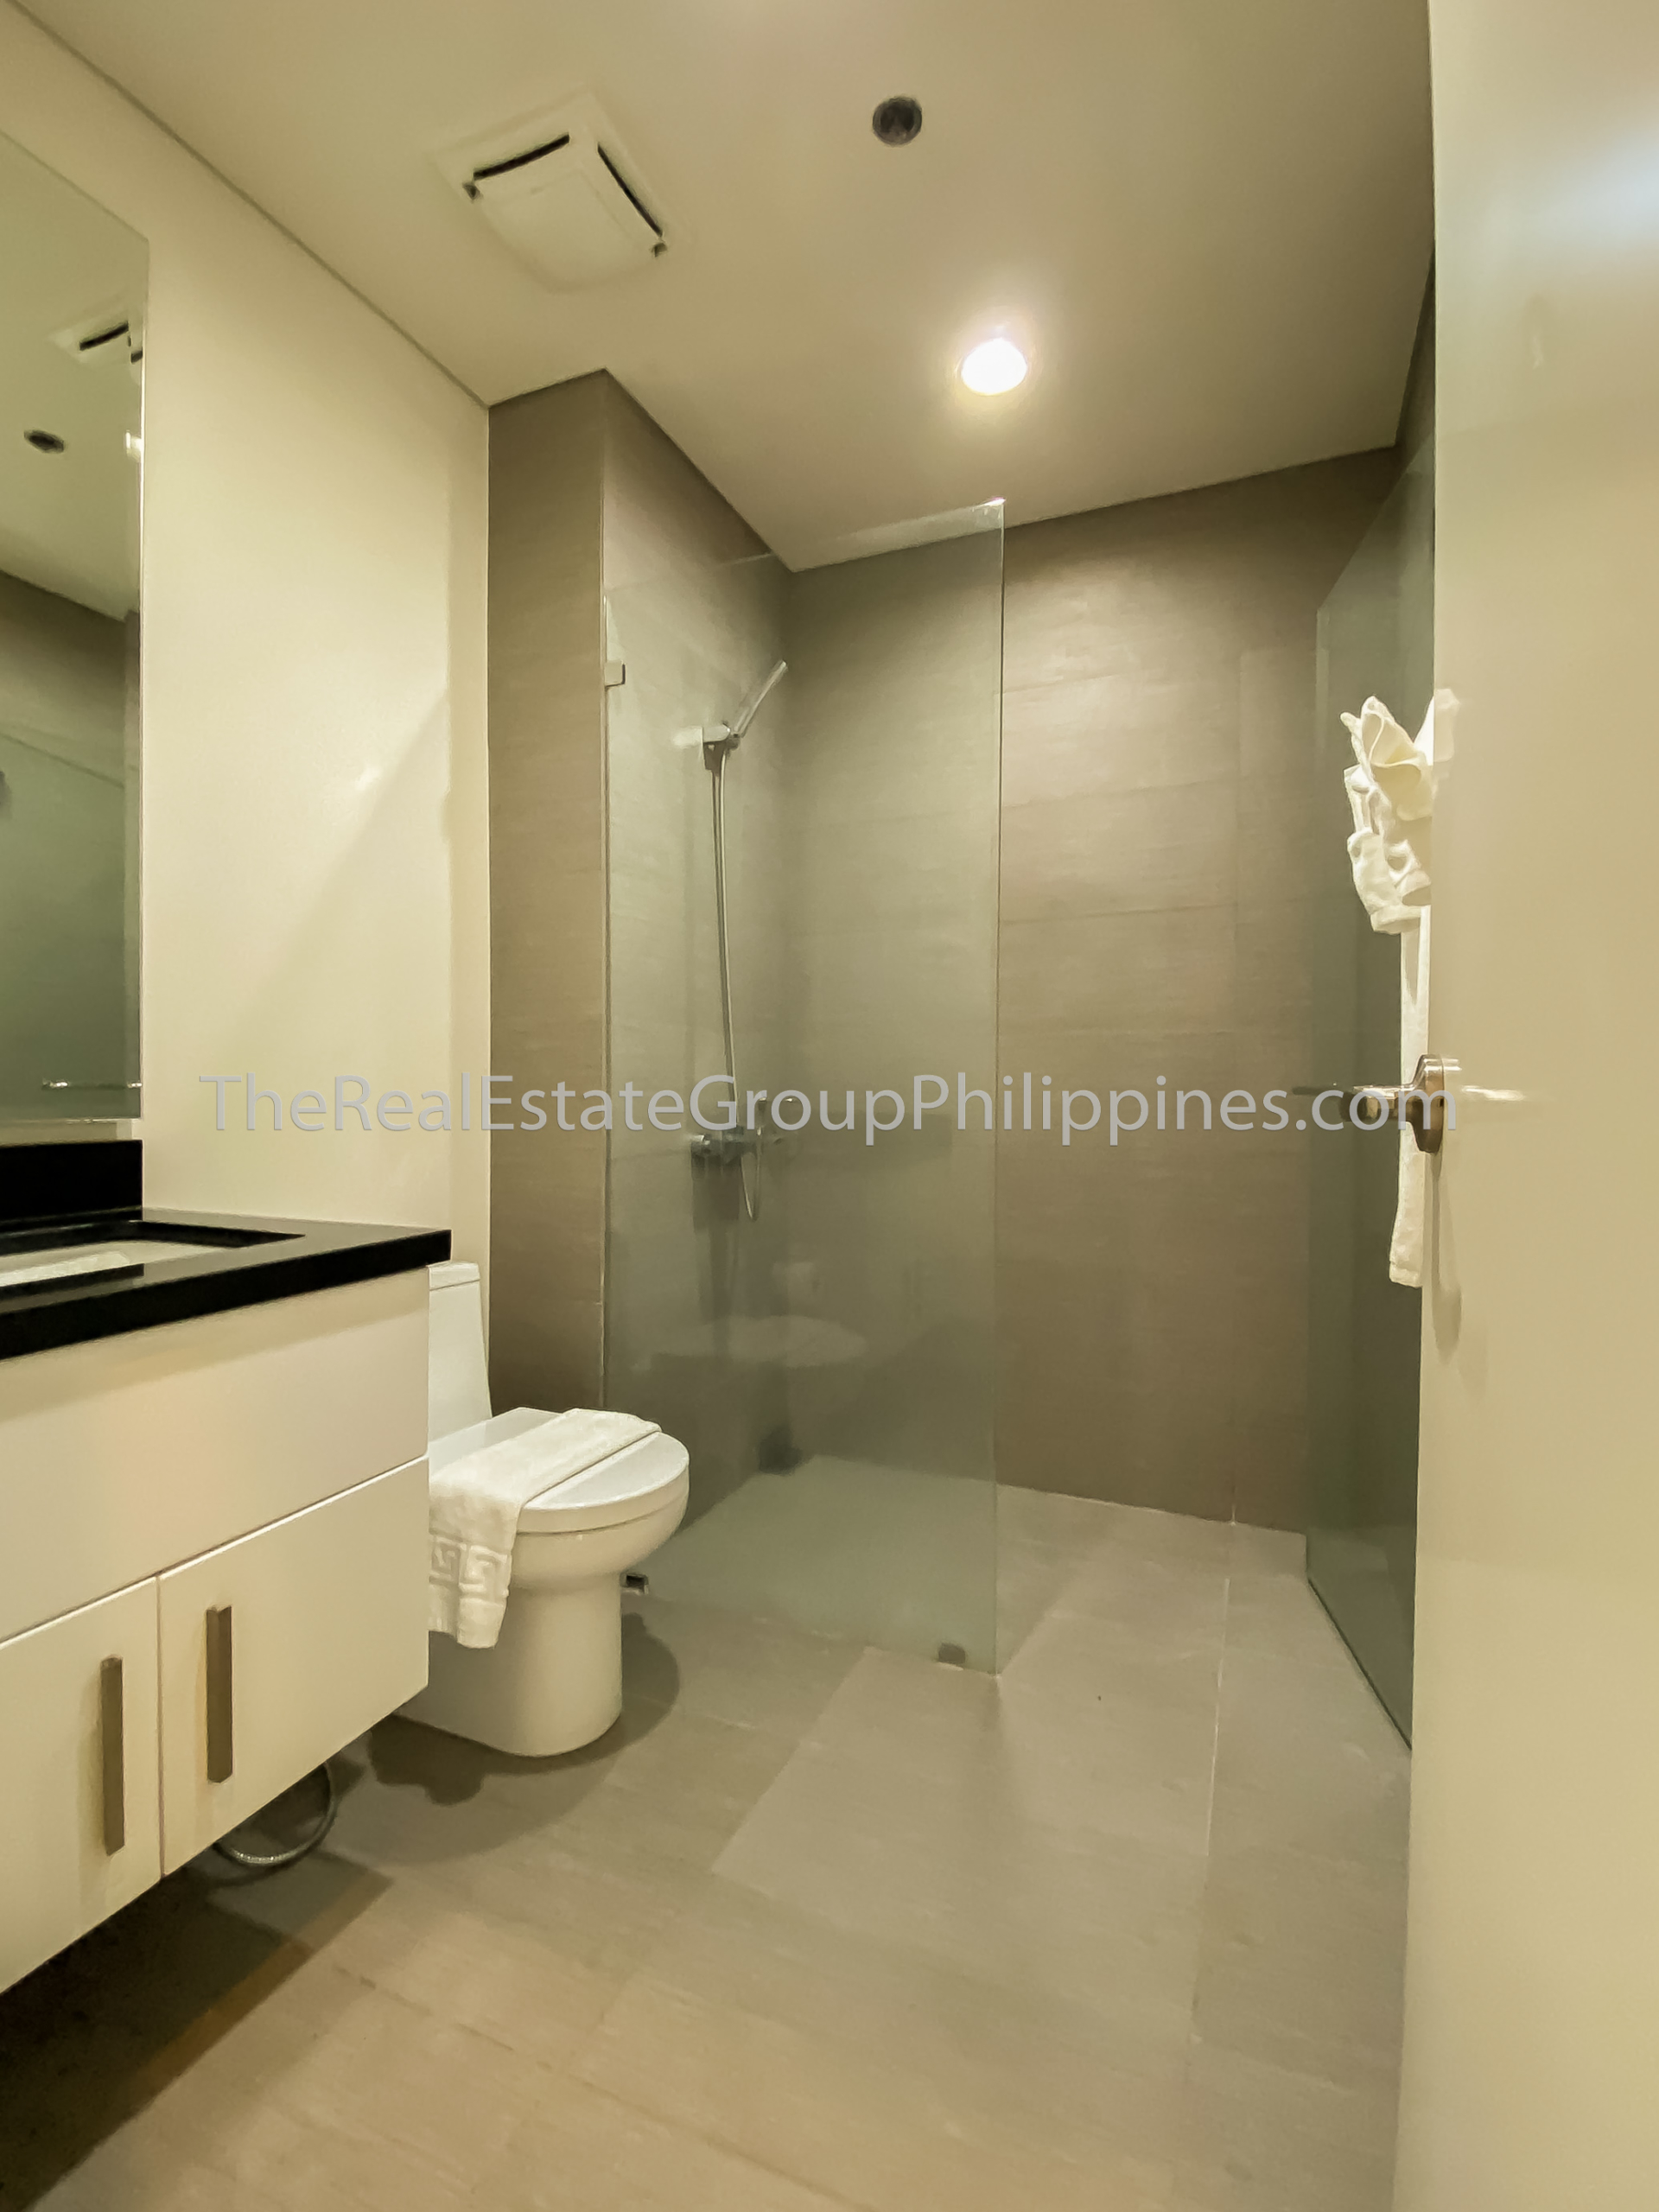 1BR Condo For Rent, Arya Residences, Tower 1, BGC - ₱75K Per Month-3